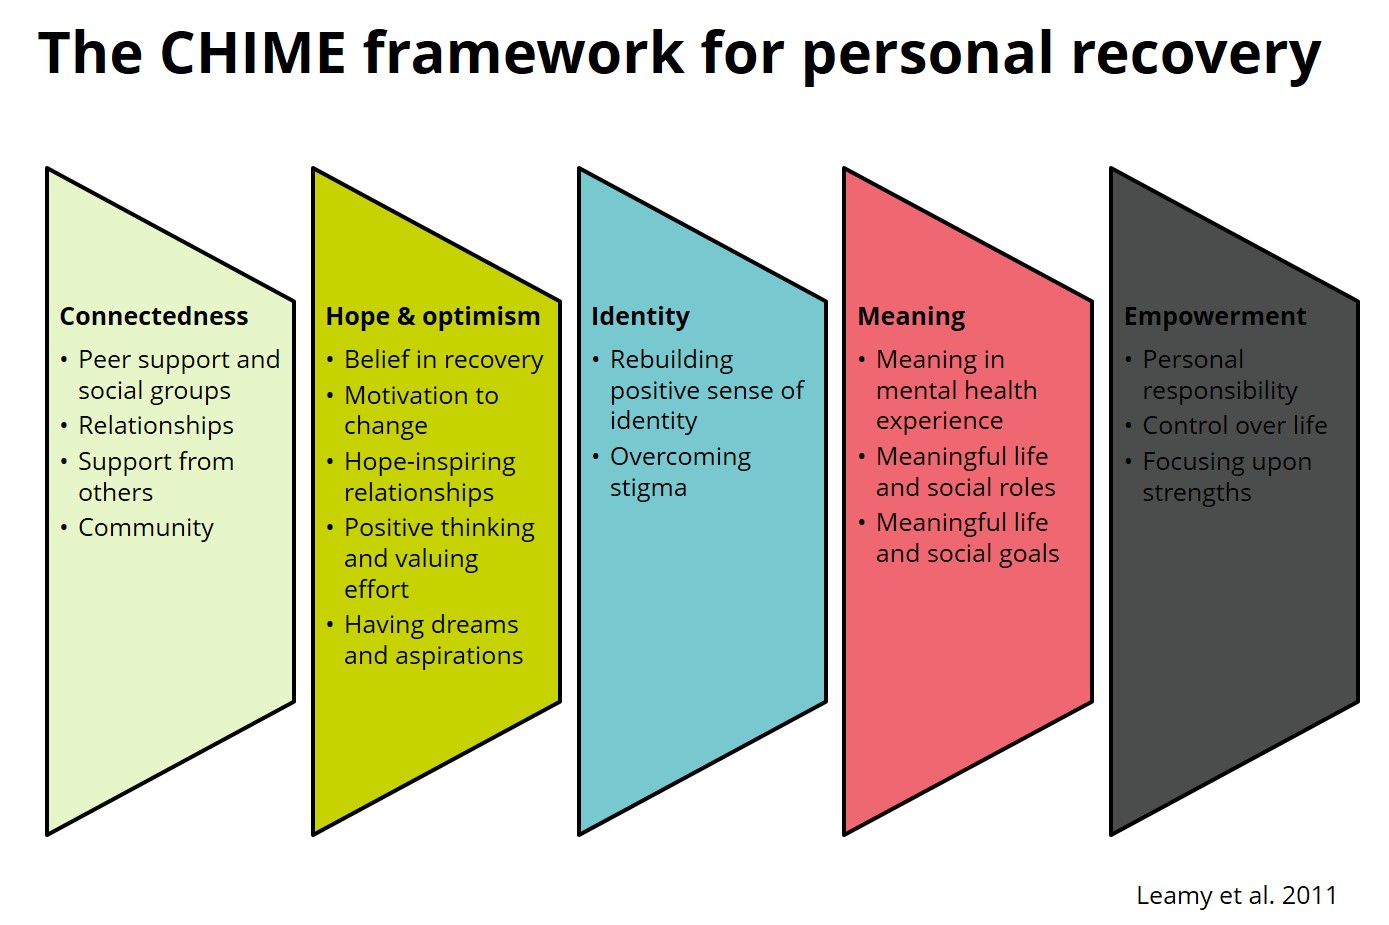 Image explaining the five stages of the CHIME model of recovery